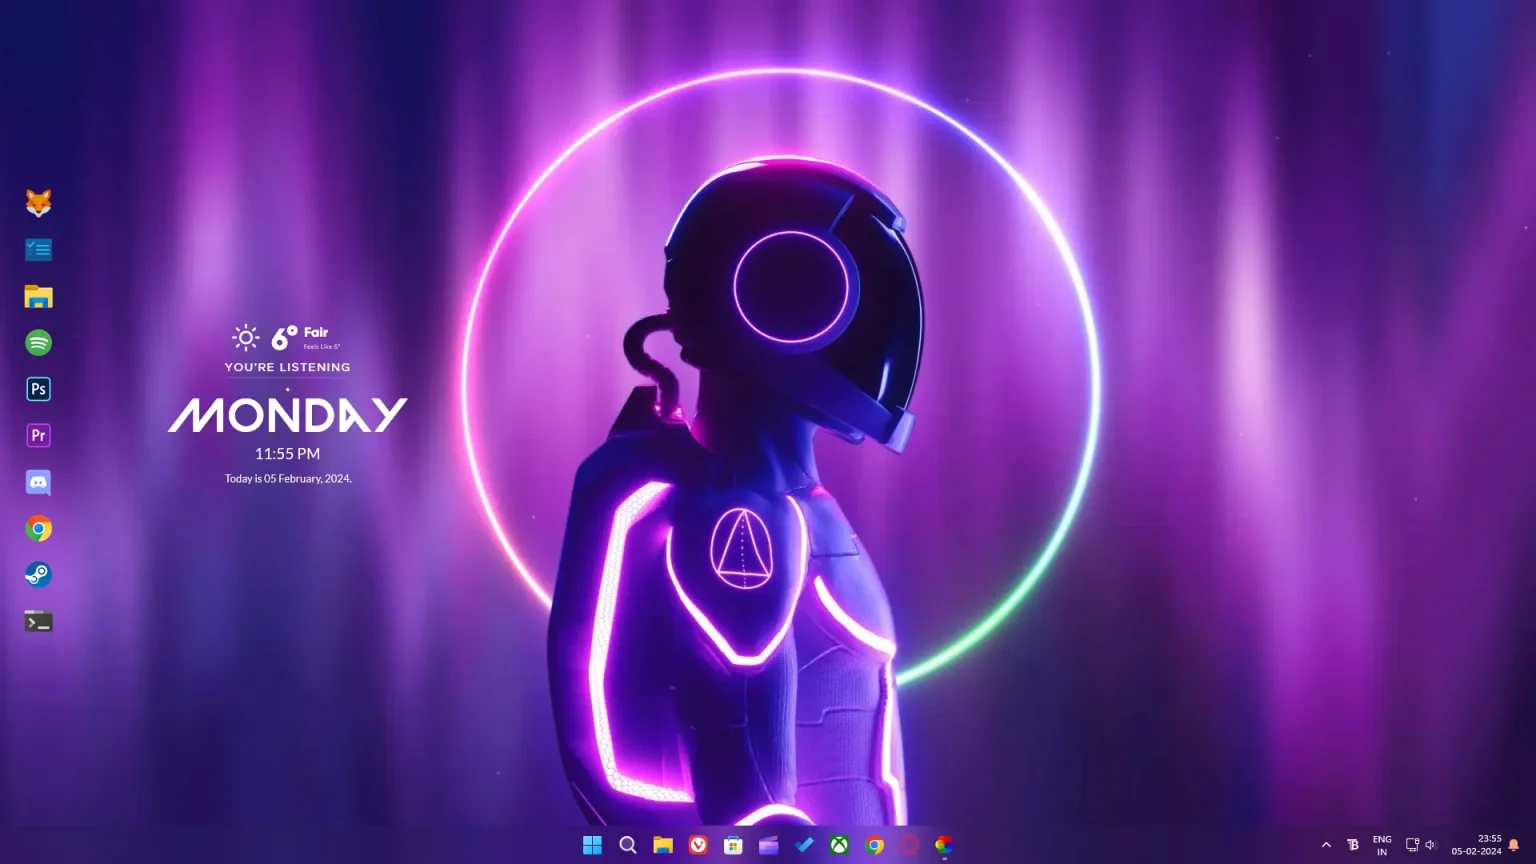 How To Make Desktop Look Awesome (Part 17)